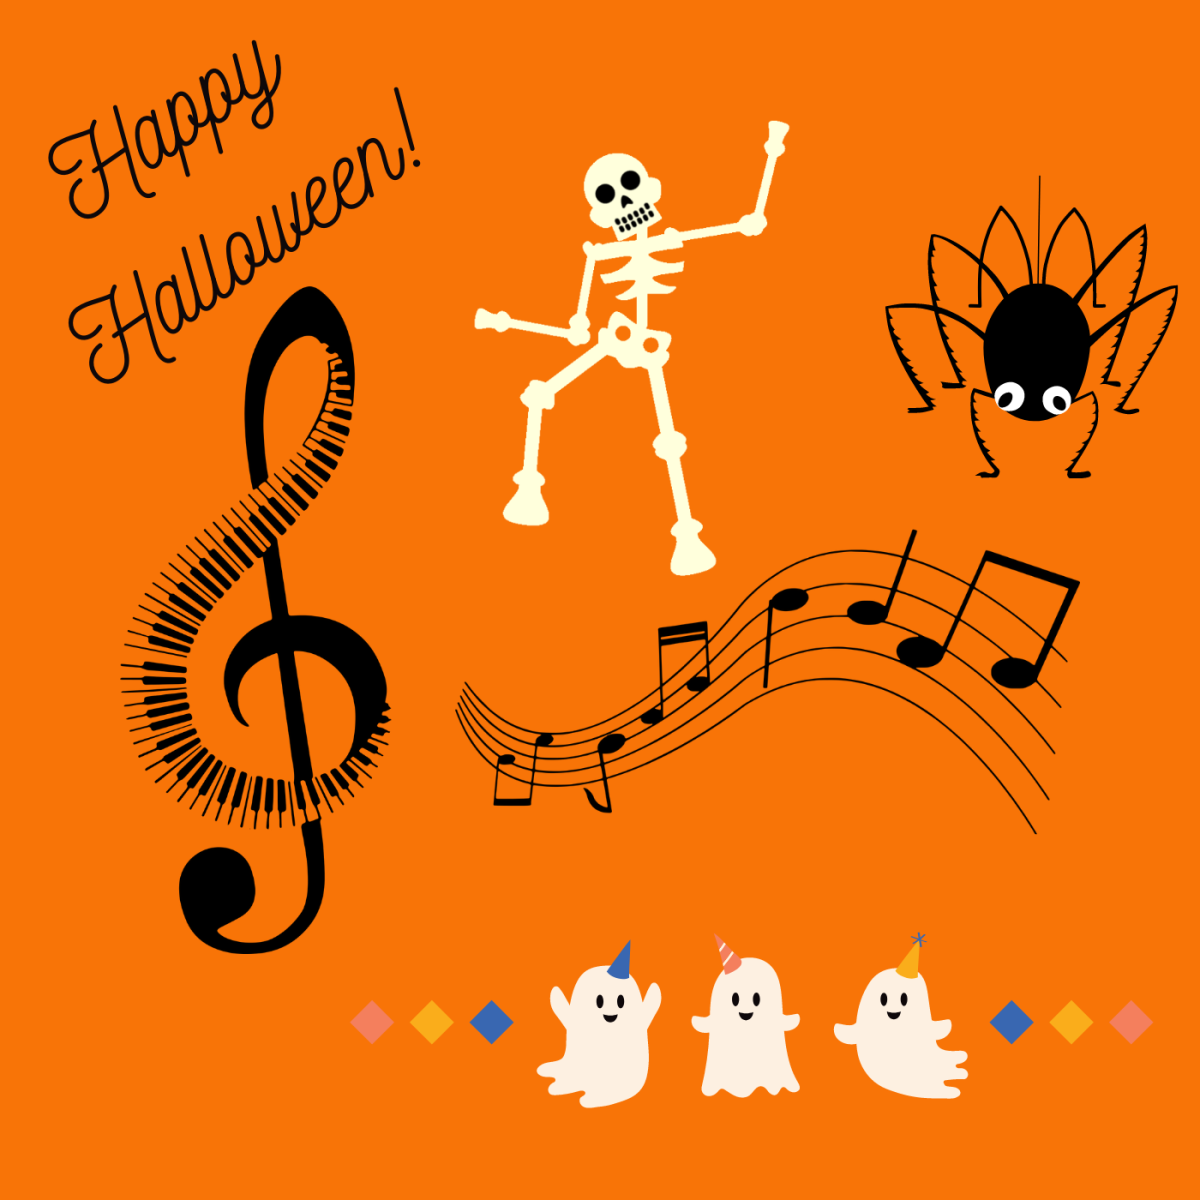 25 Songs for Your Halloween Party Playlist